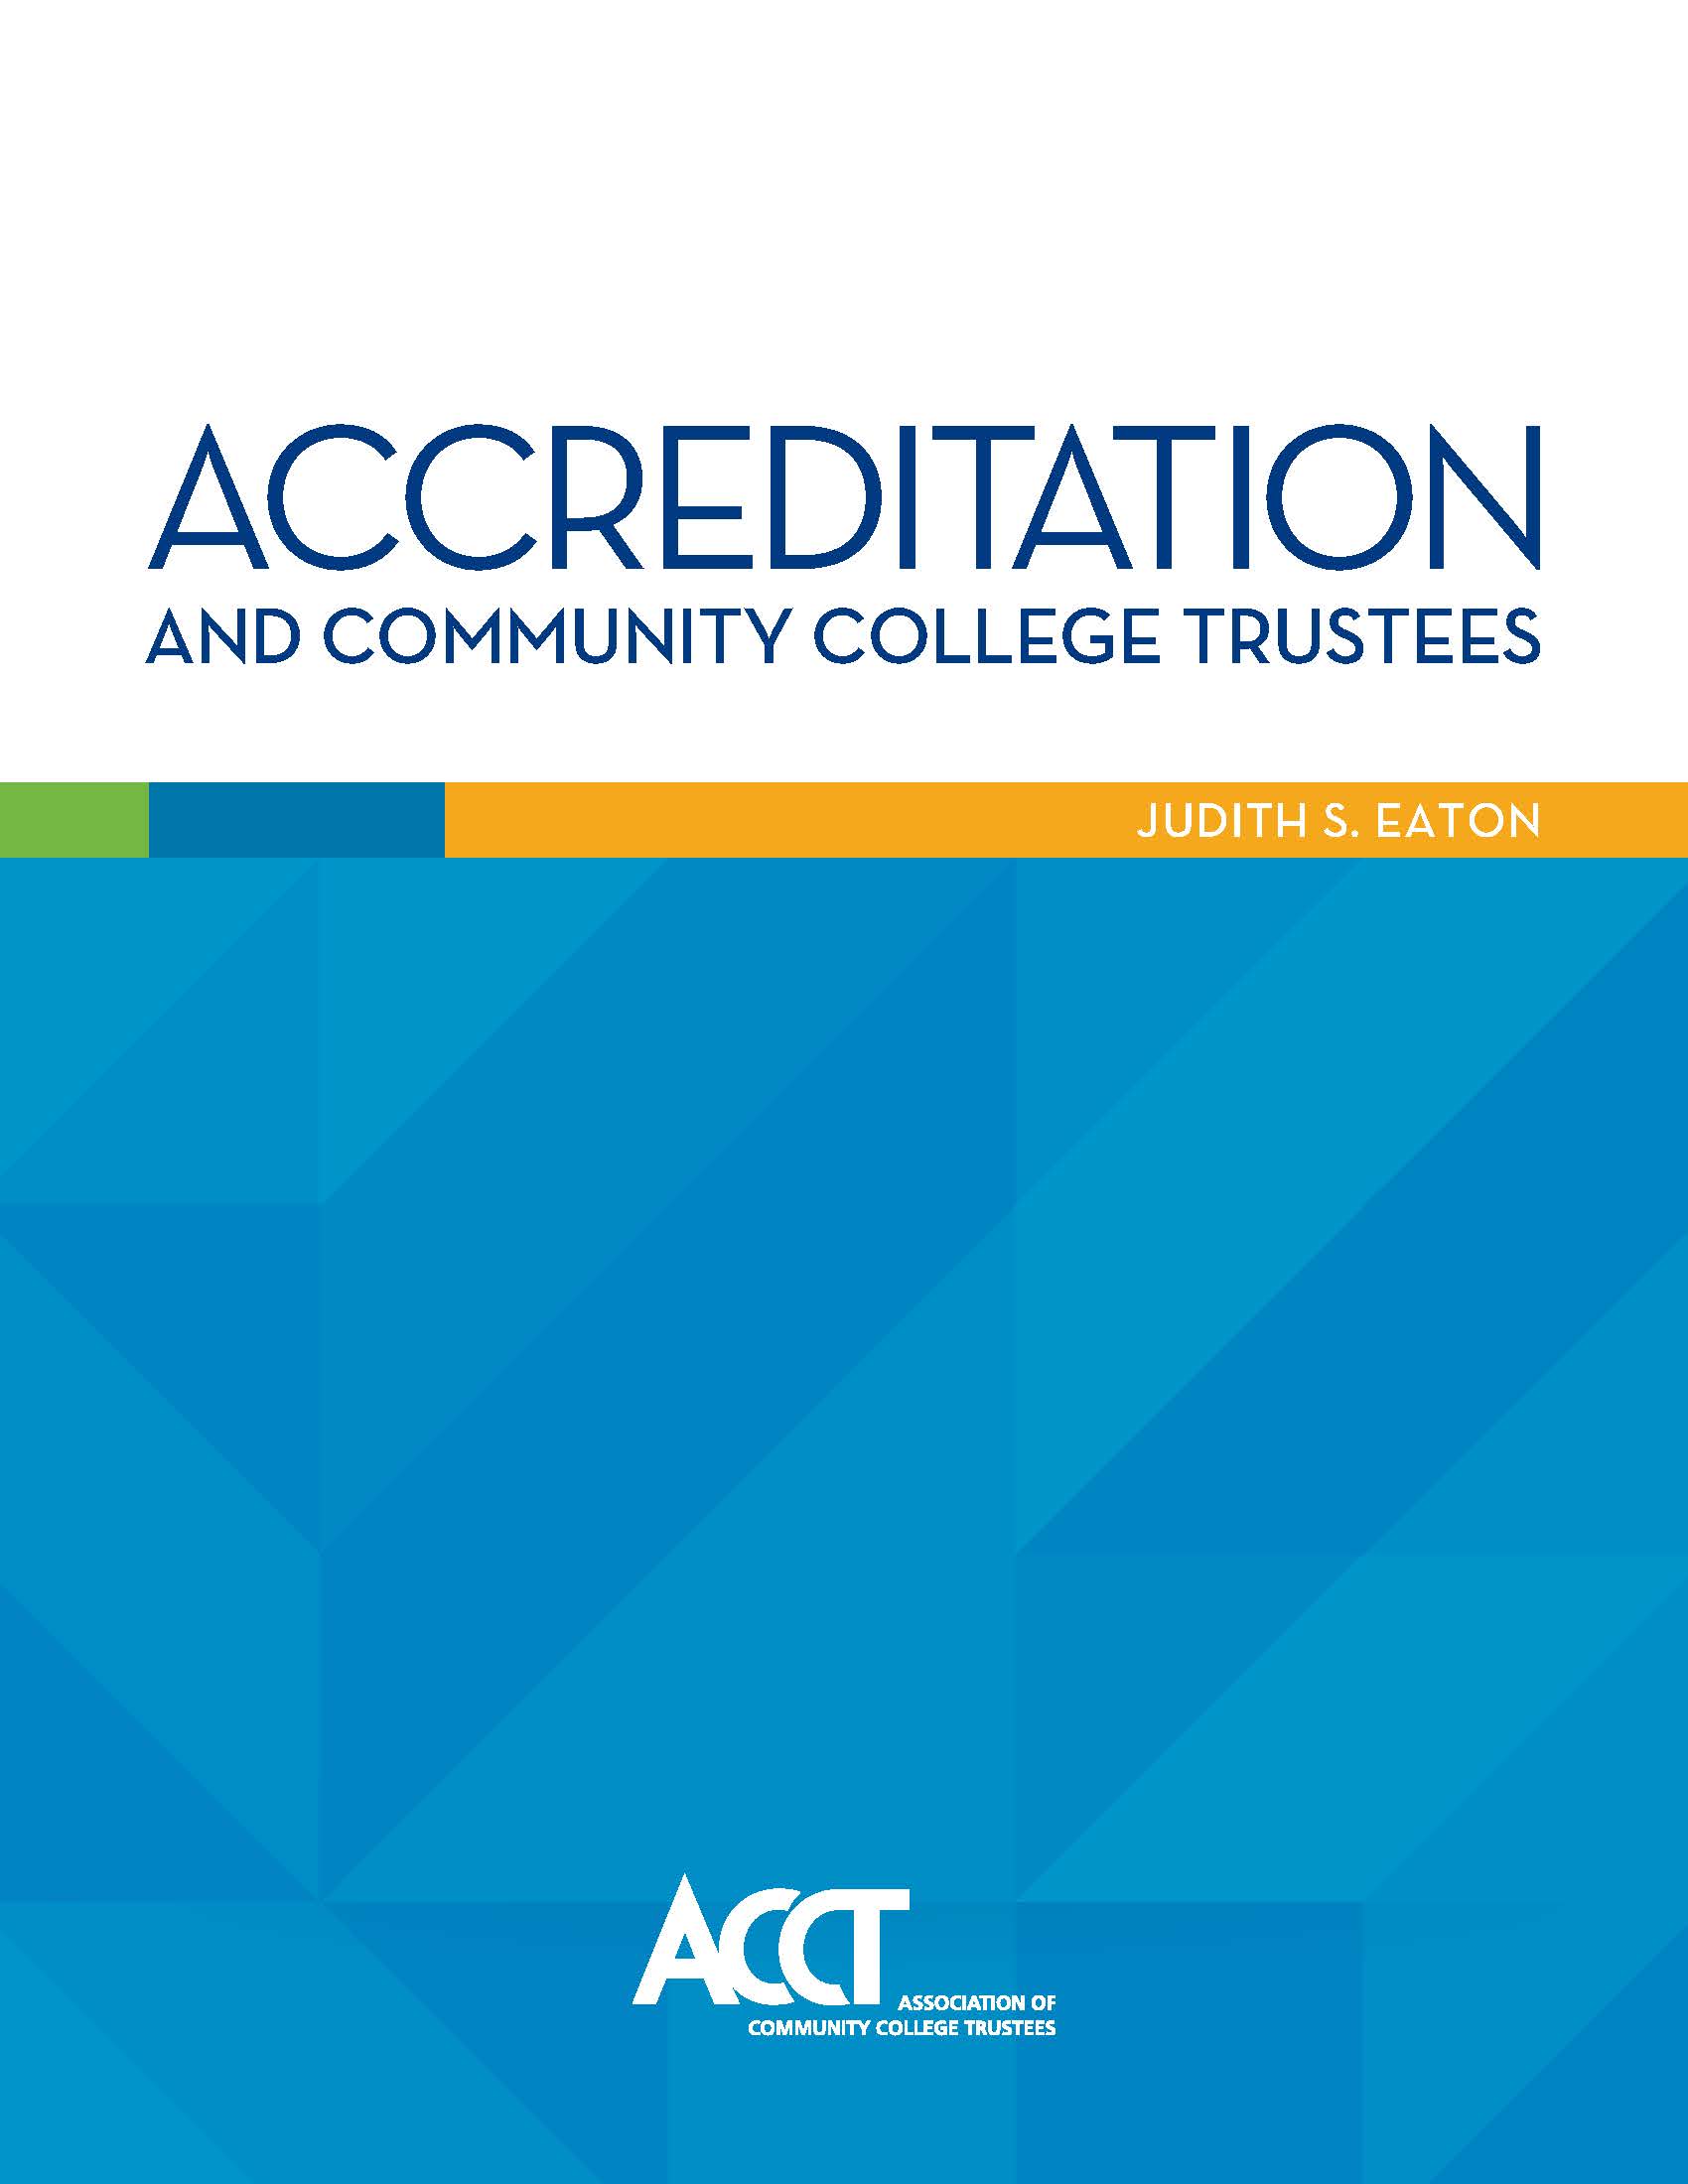 Accreditation and Community College Trustees